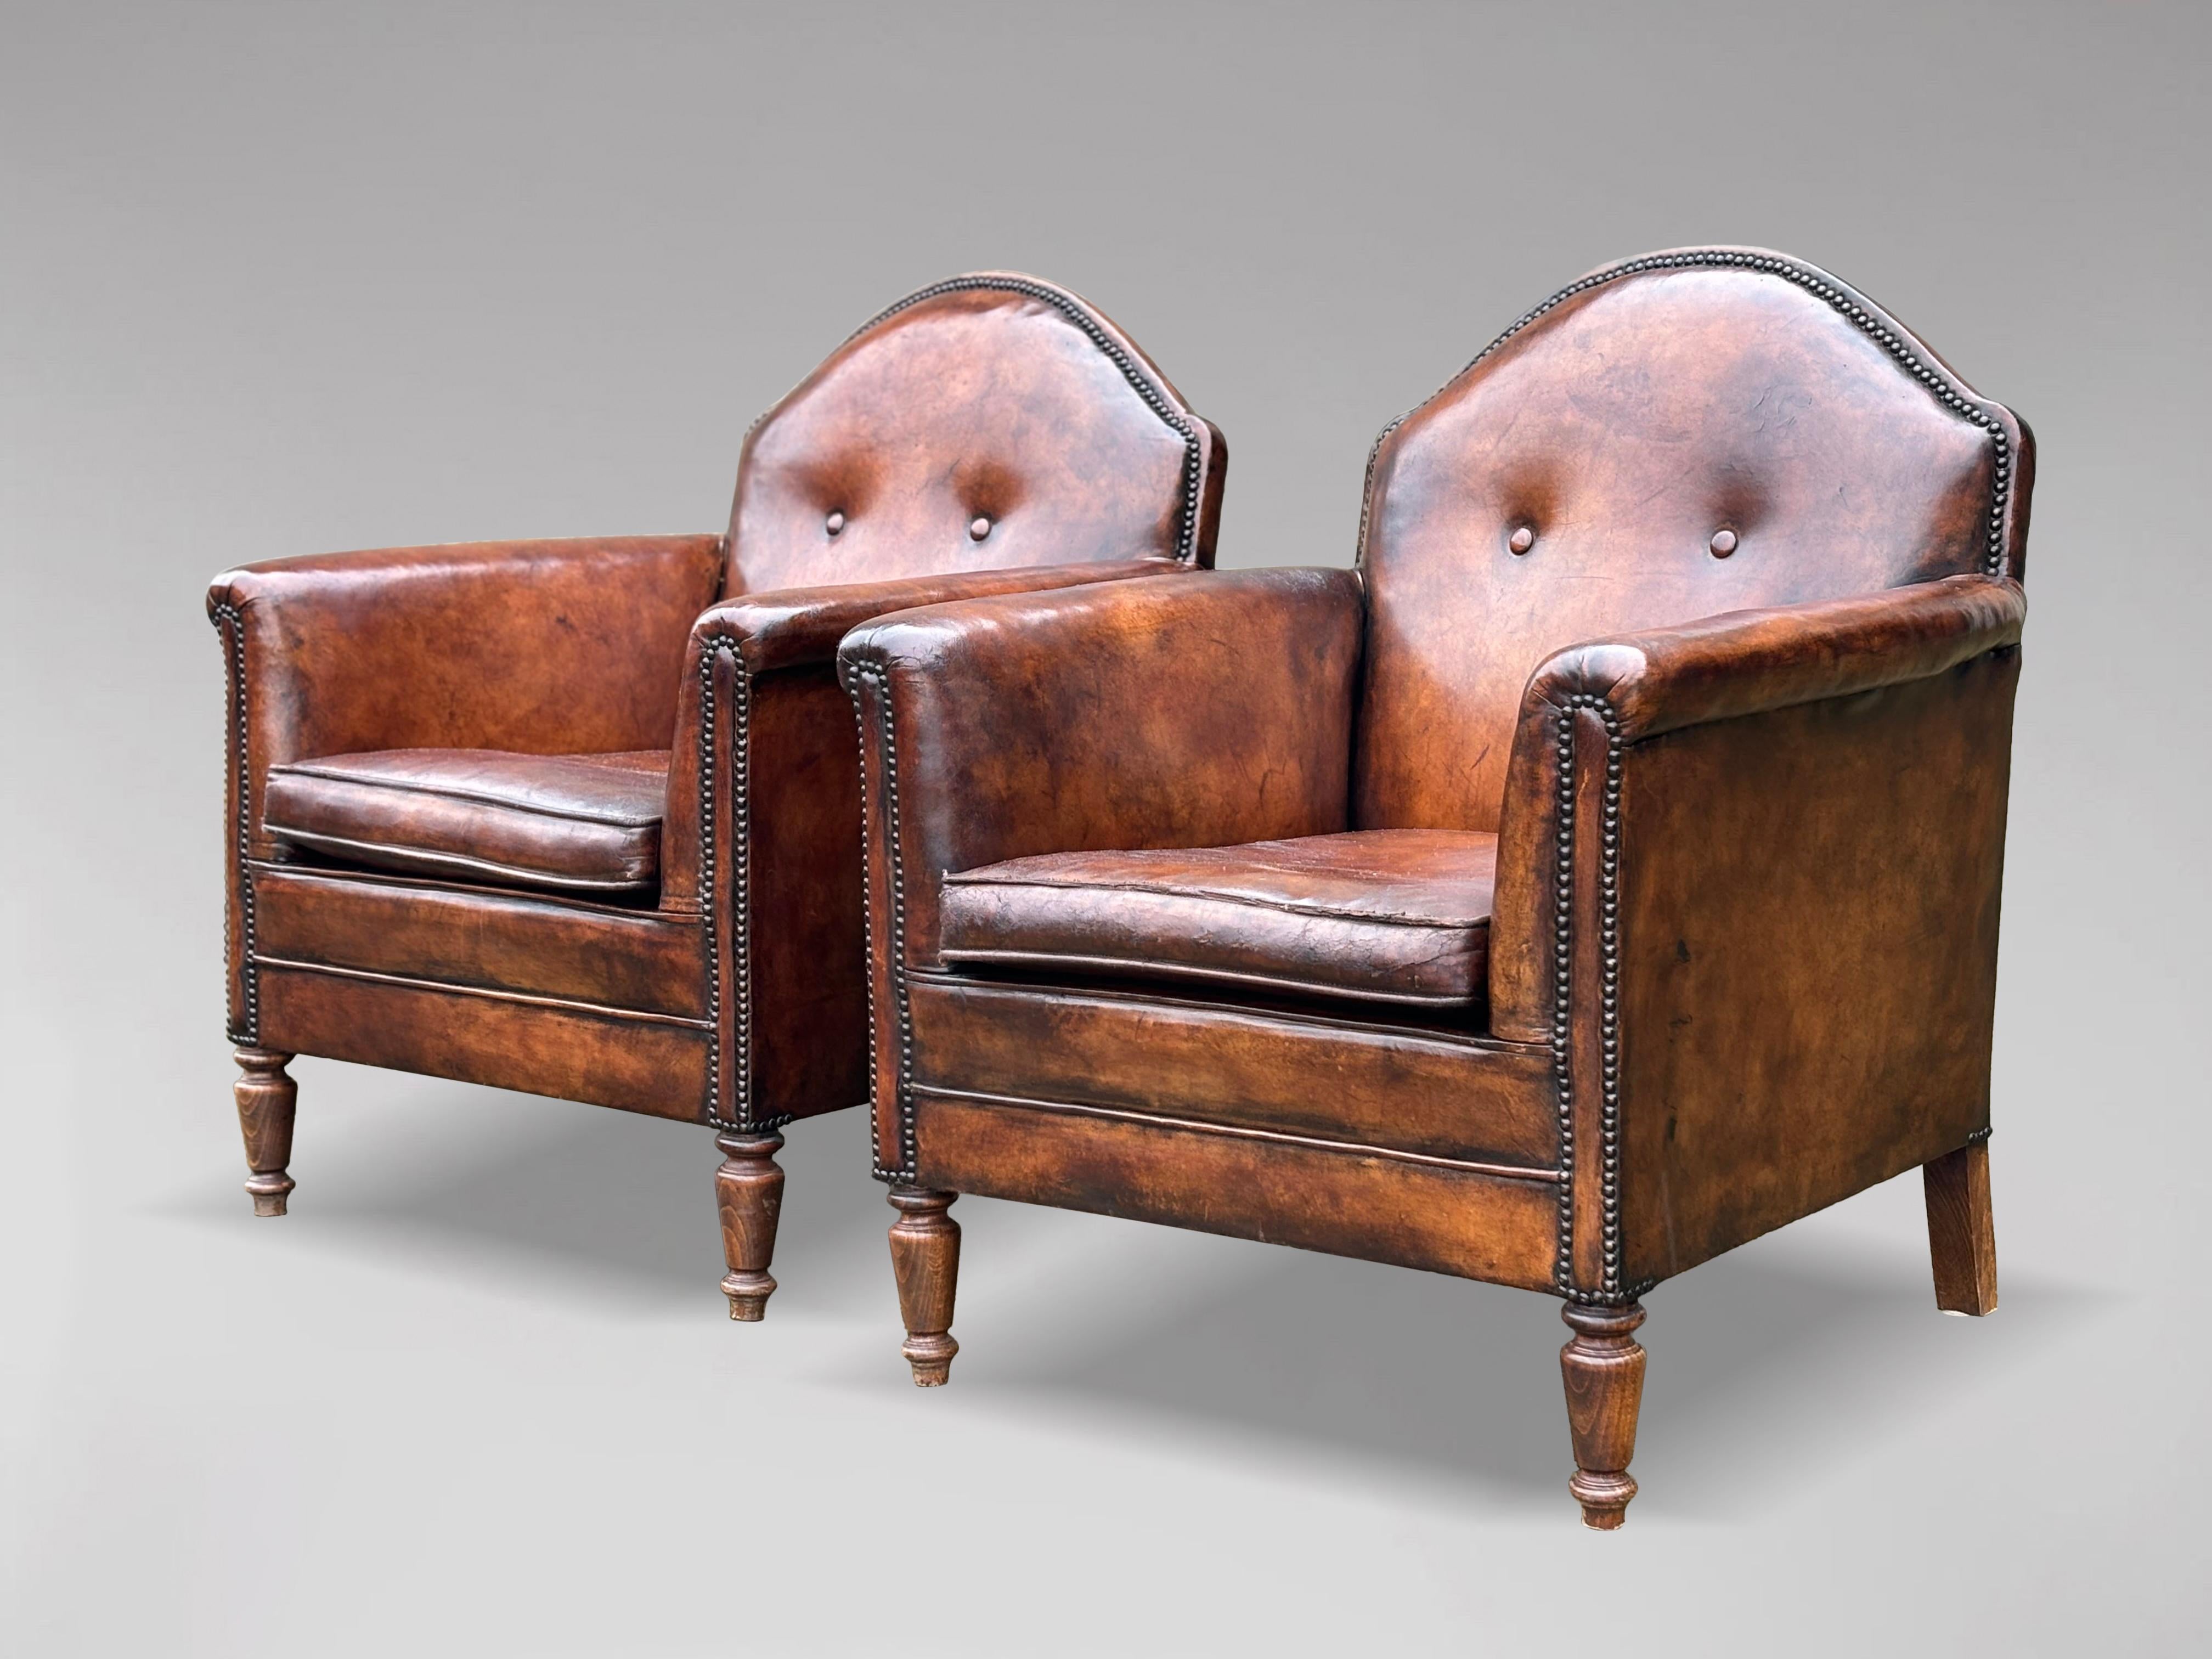 Pair of 19th Century French Brown Leather Club Armchairs In Good Condition In Petworth,West Sussex, GB